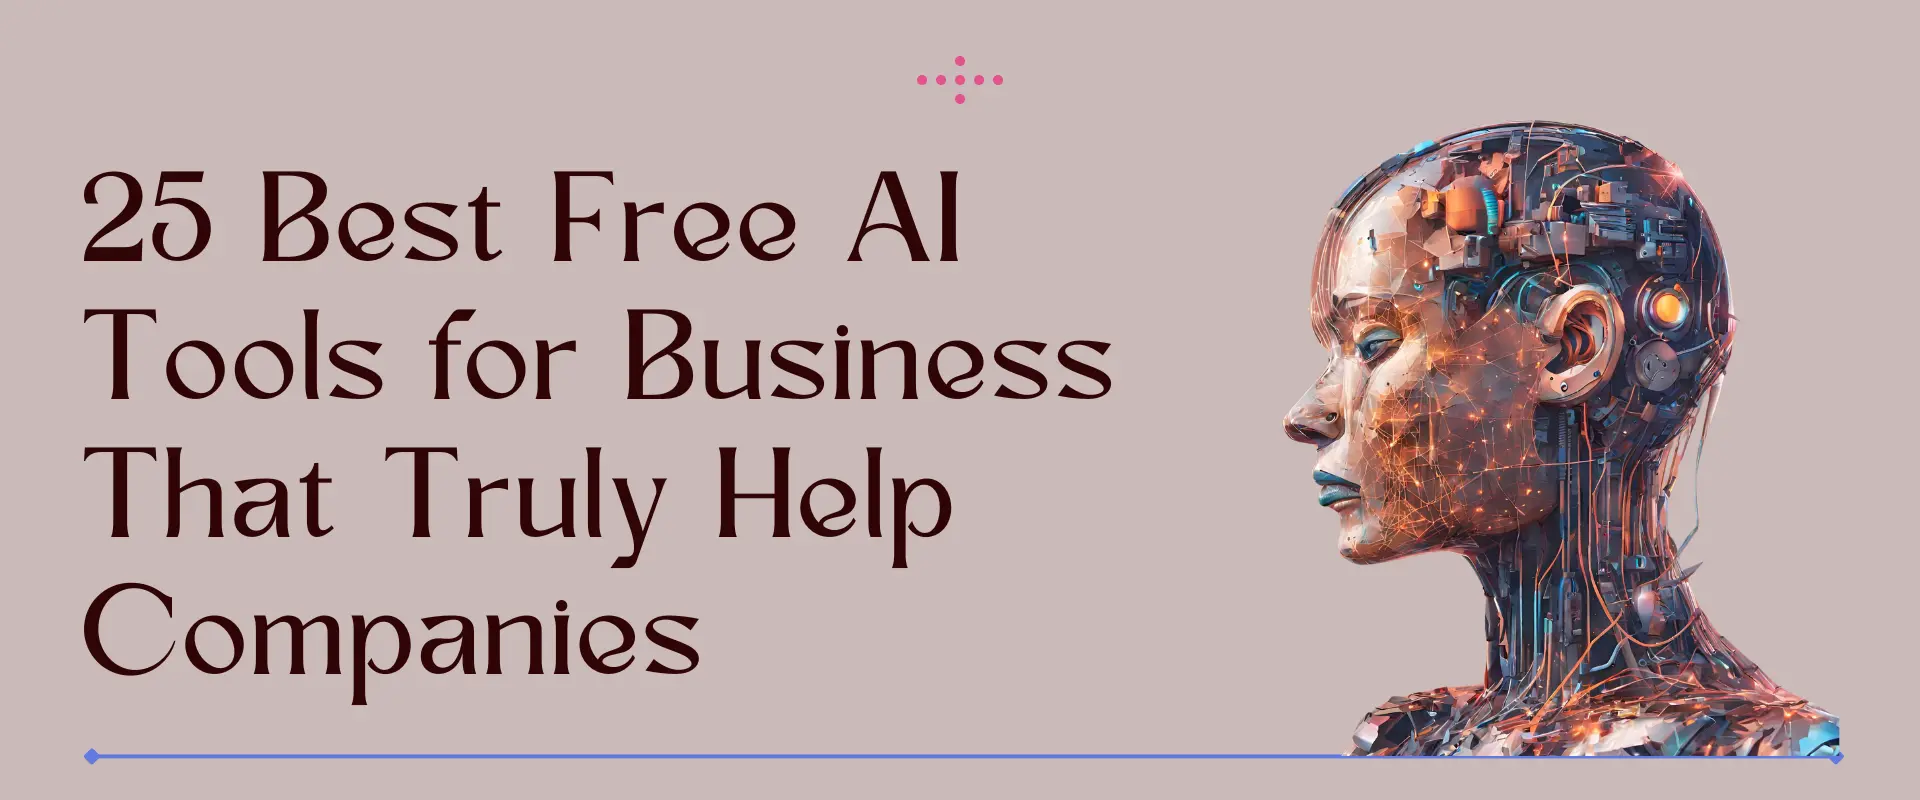 25 Best Free AI Tools for Business That Truly Help Companies